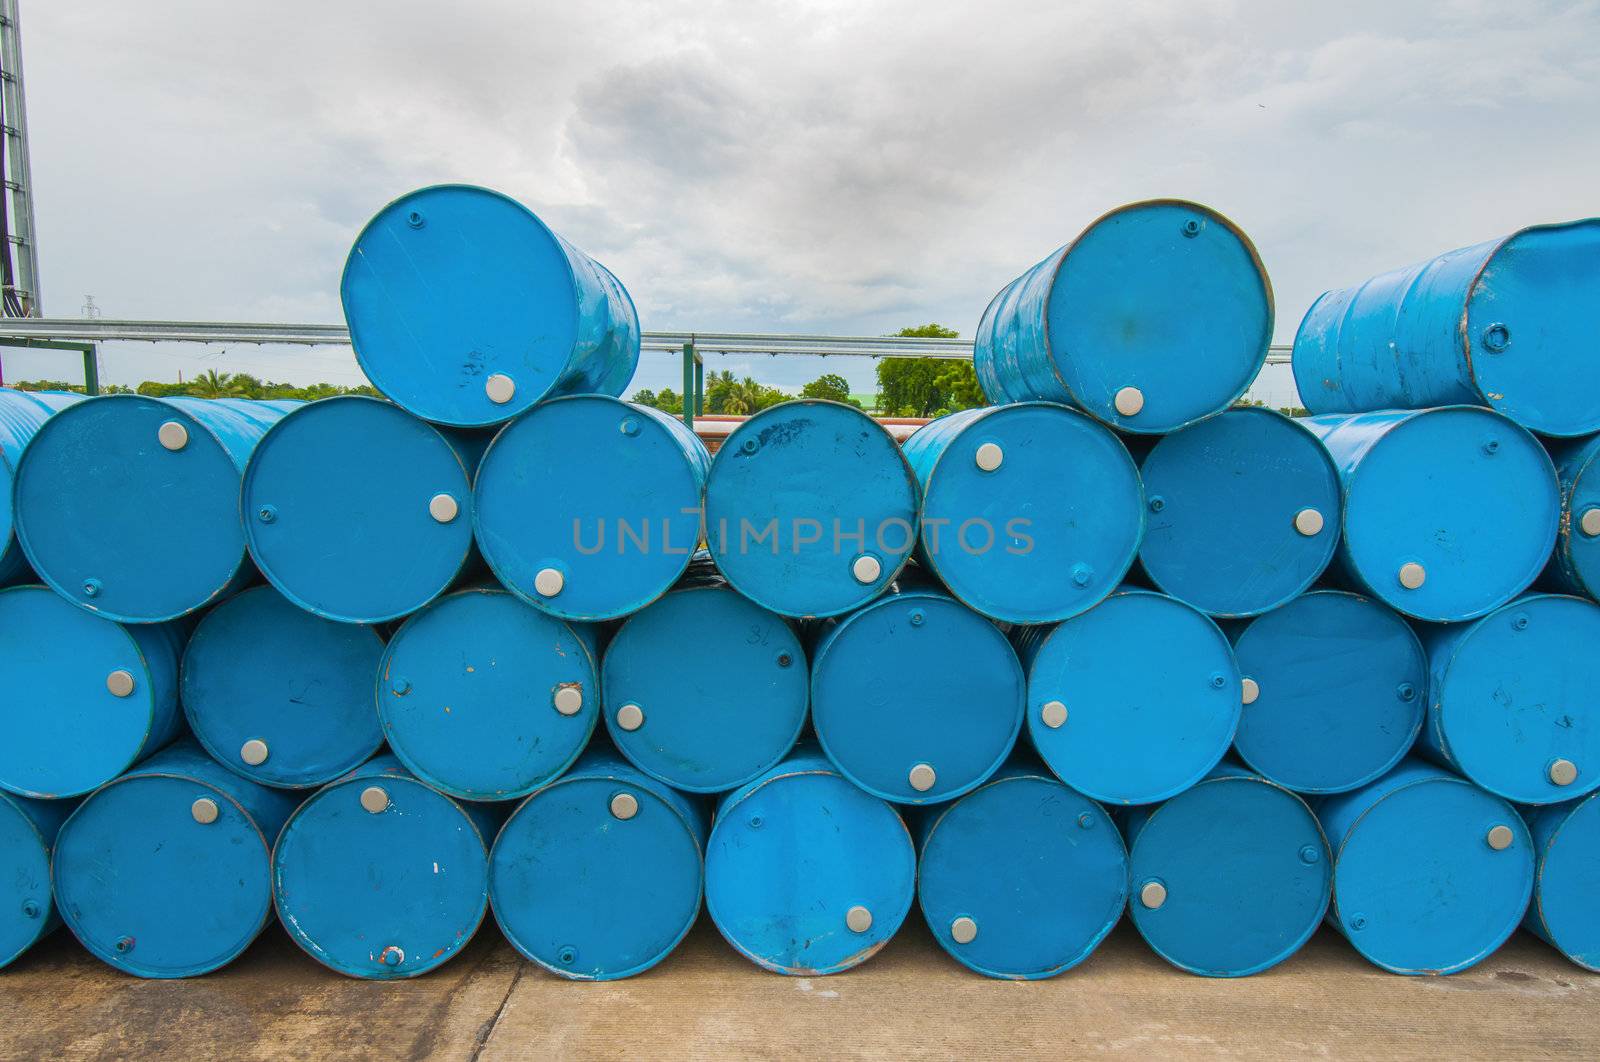 oil barrels or chemical drums stacked up by TanawatPontchour